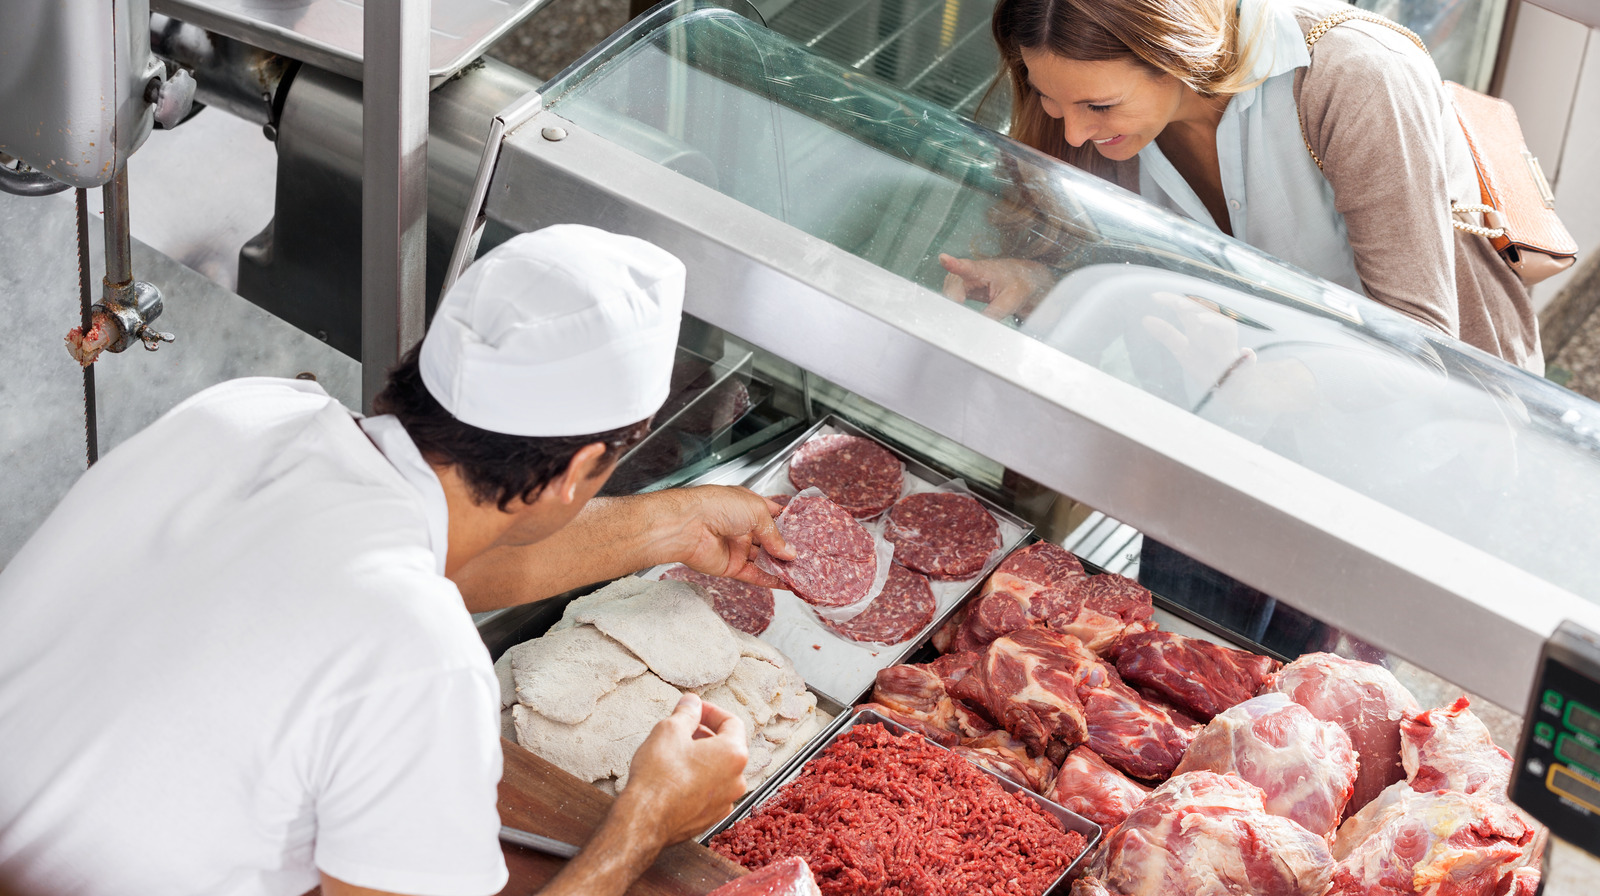 Butcher talk: How to order at the meat counter, Meat & Seafood